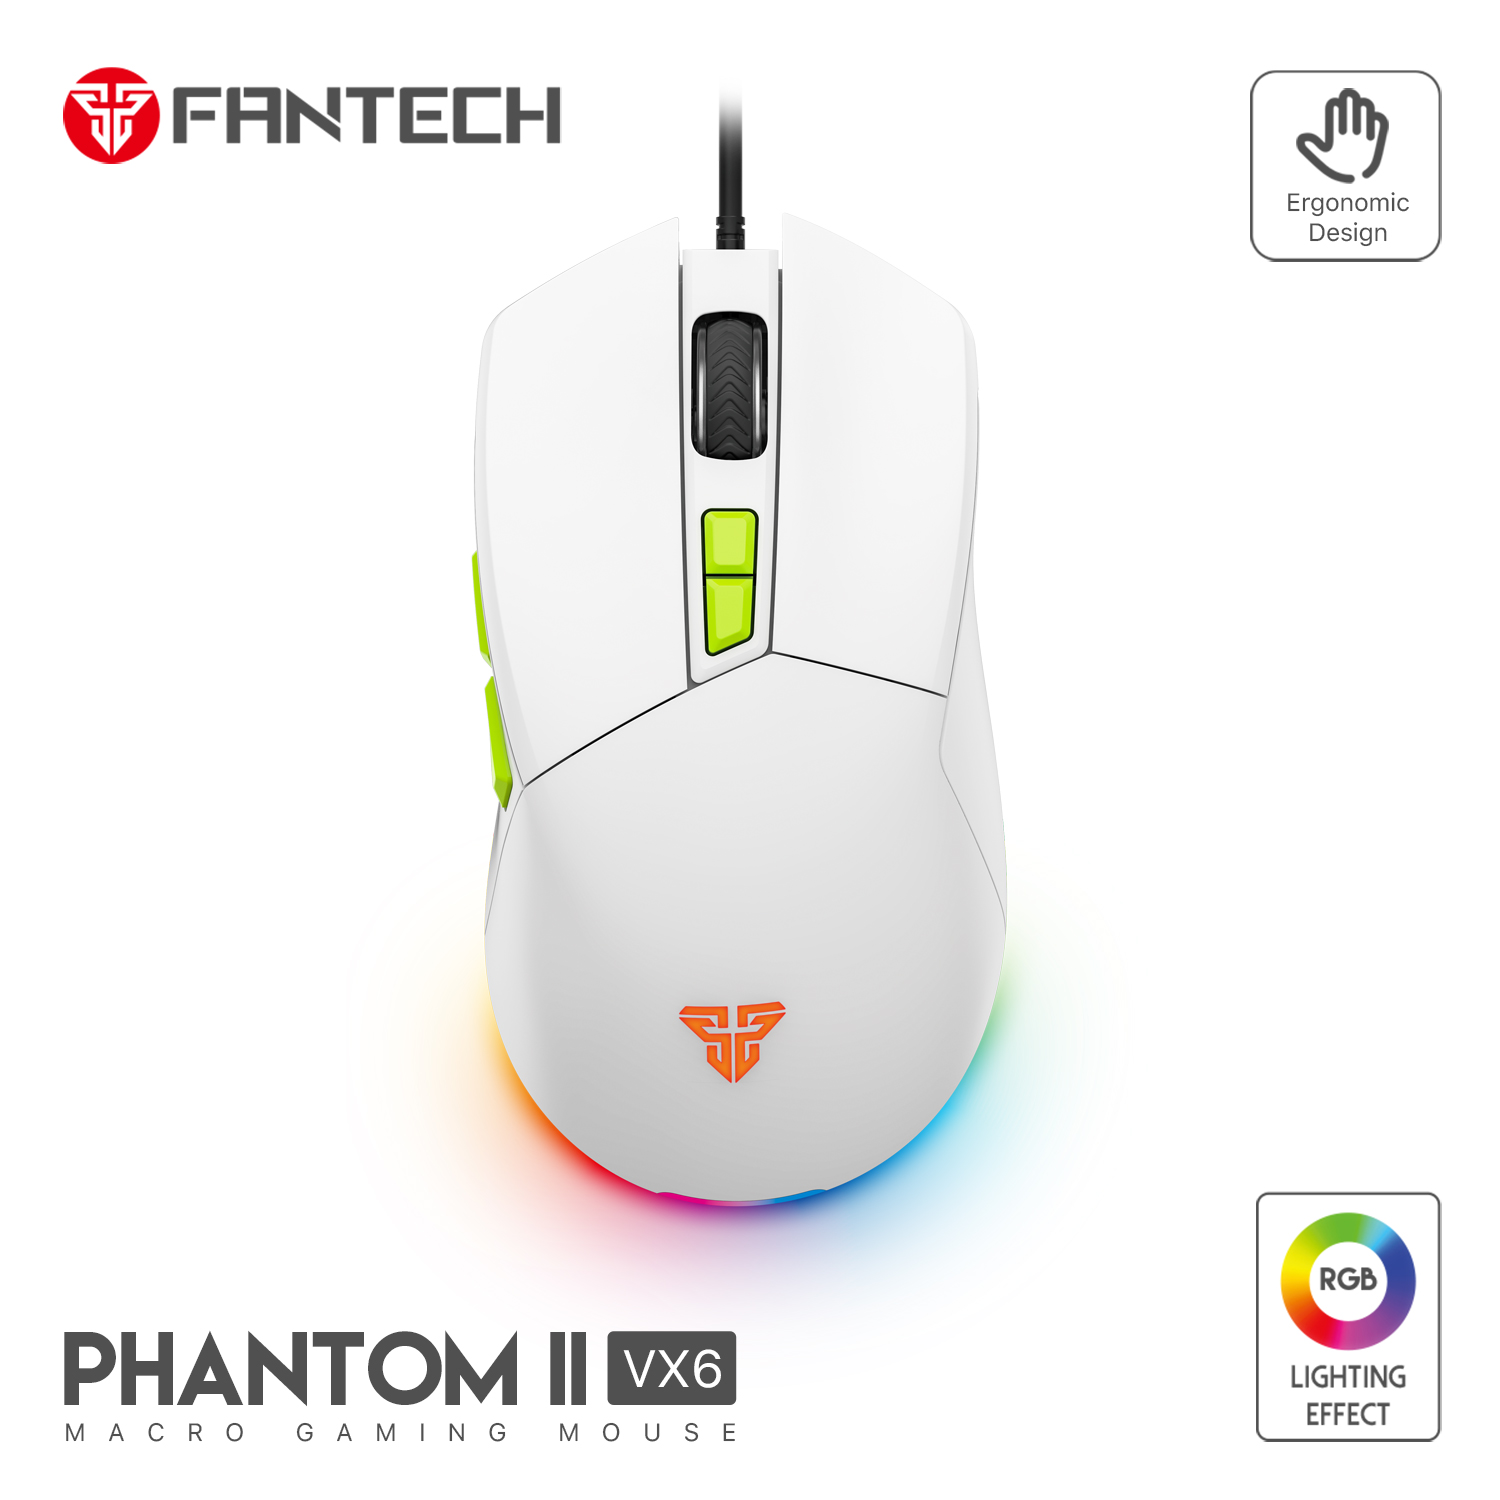 FANTECH VX6 WIRED GAMING MOUSE